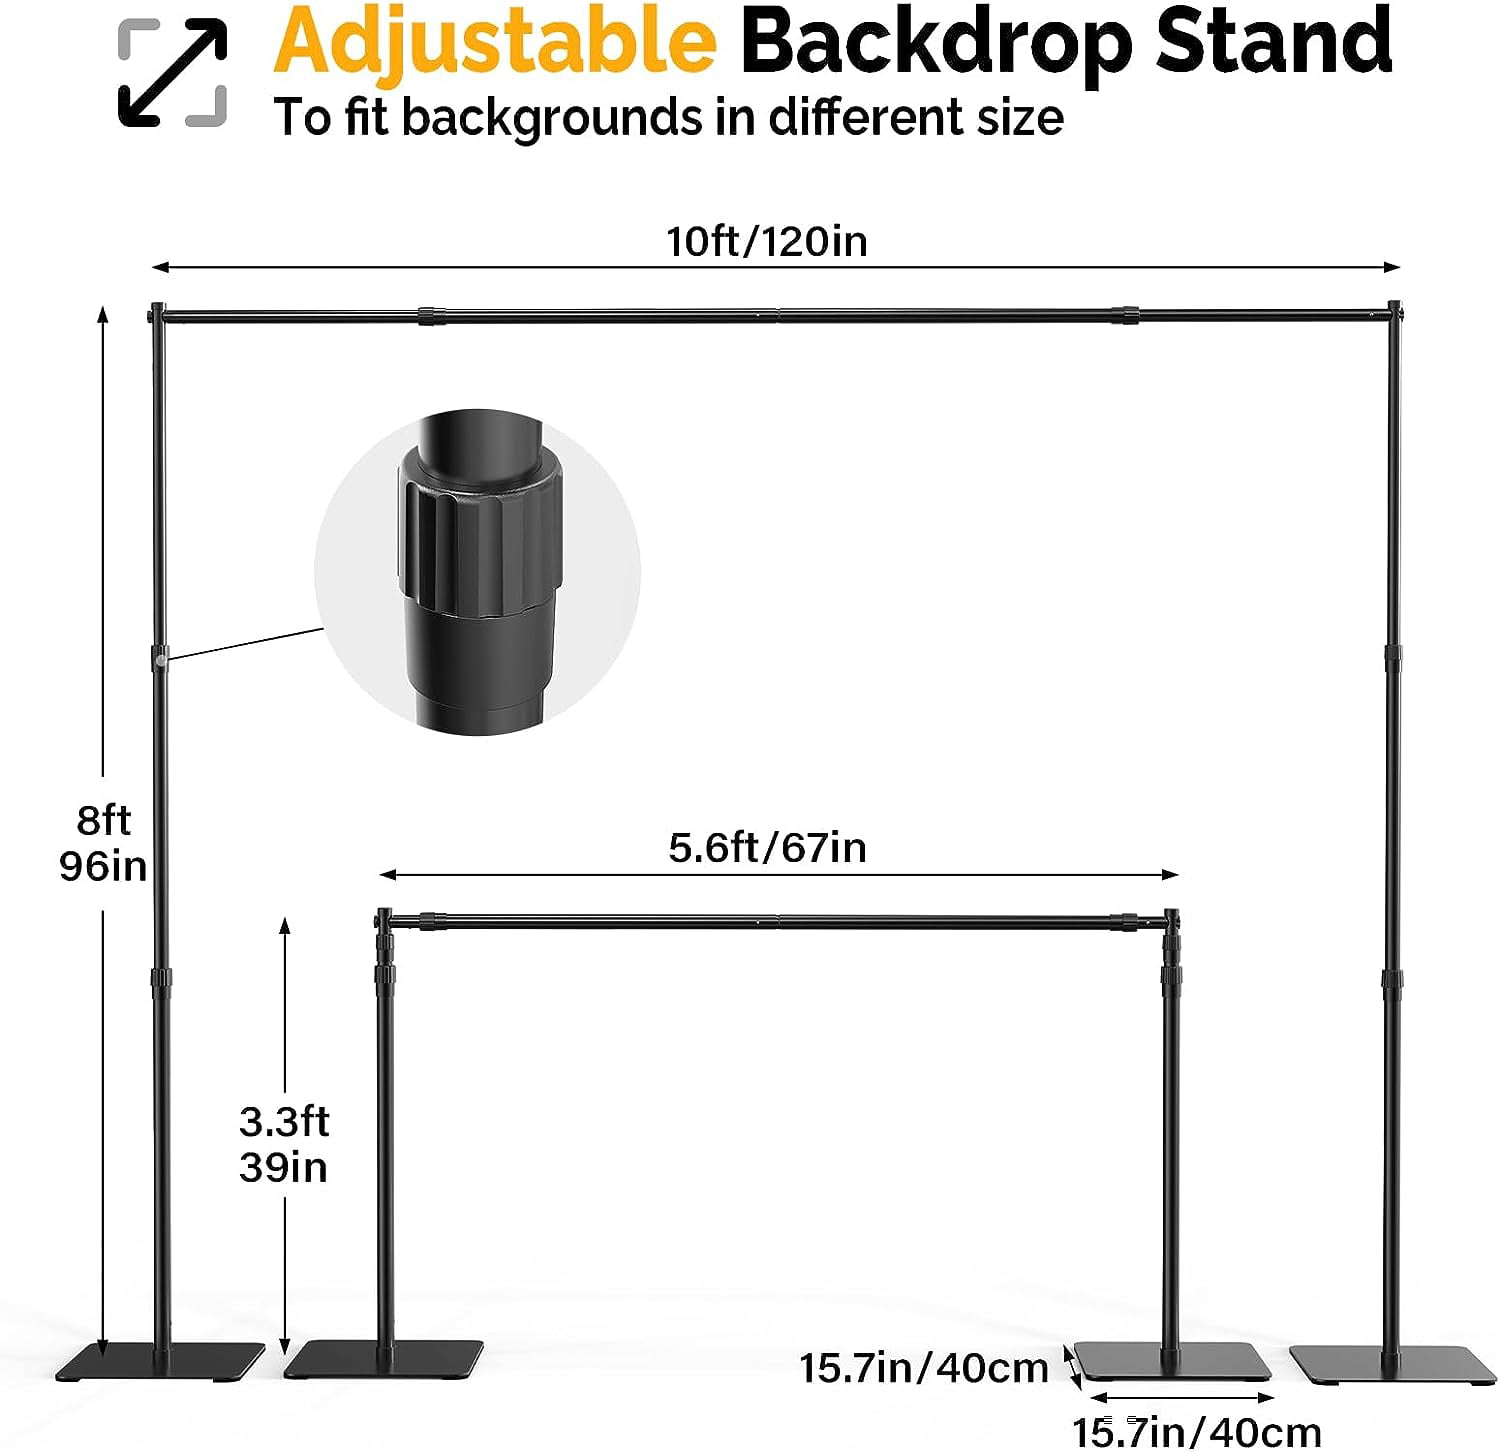 ShowMaven 120 in. x 96 in. Backdrop Stand Adjustable Height and